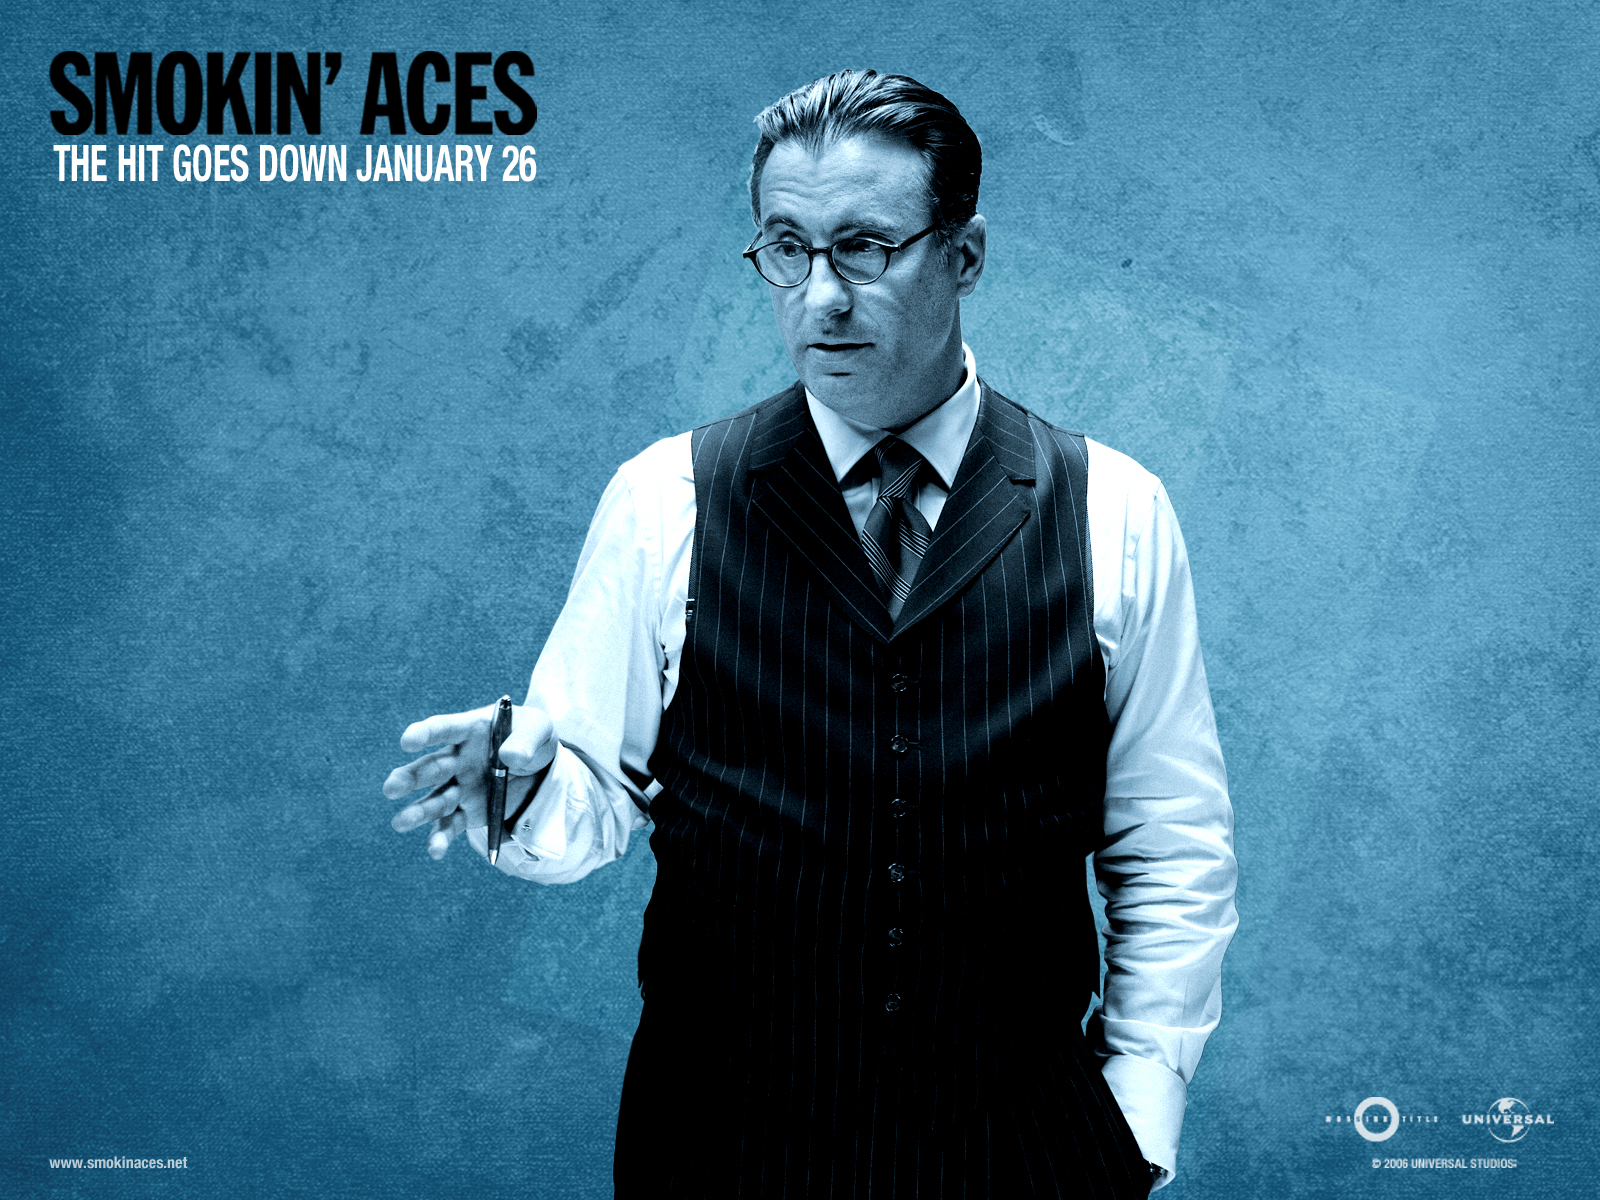 Smokin Aces Image Stanley Locke HD Wallpaper And Background